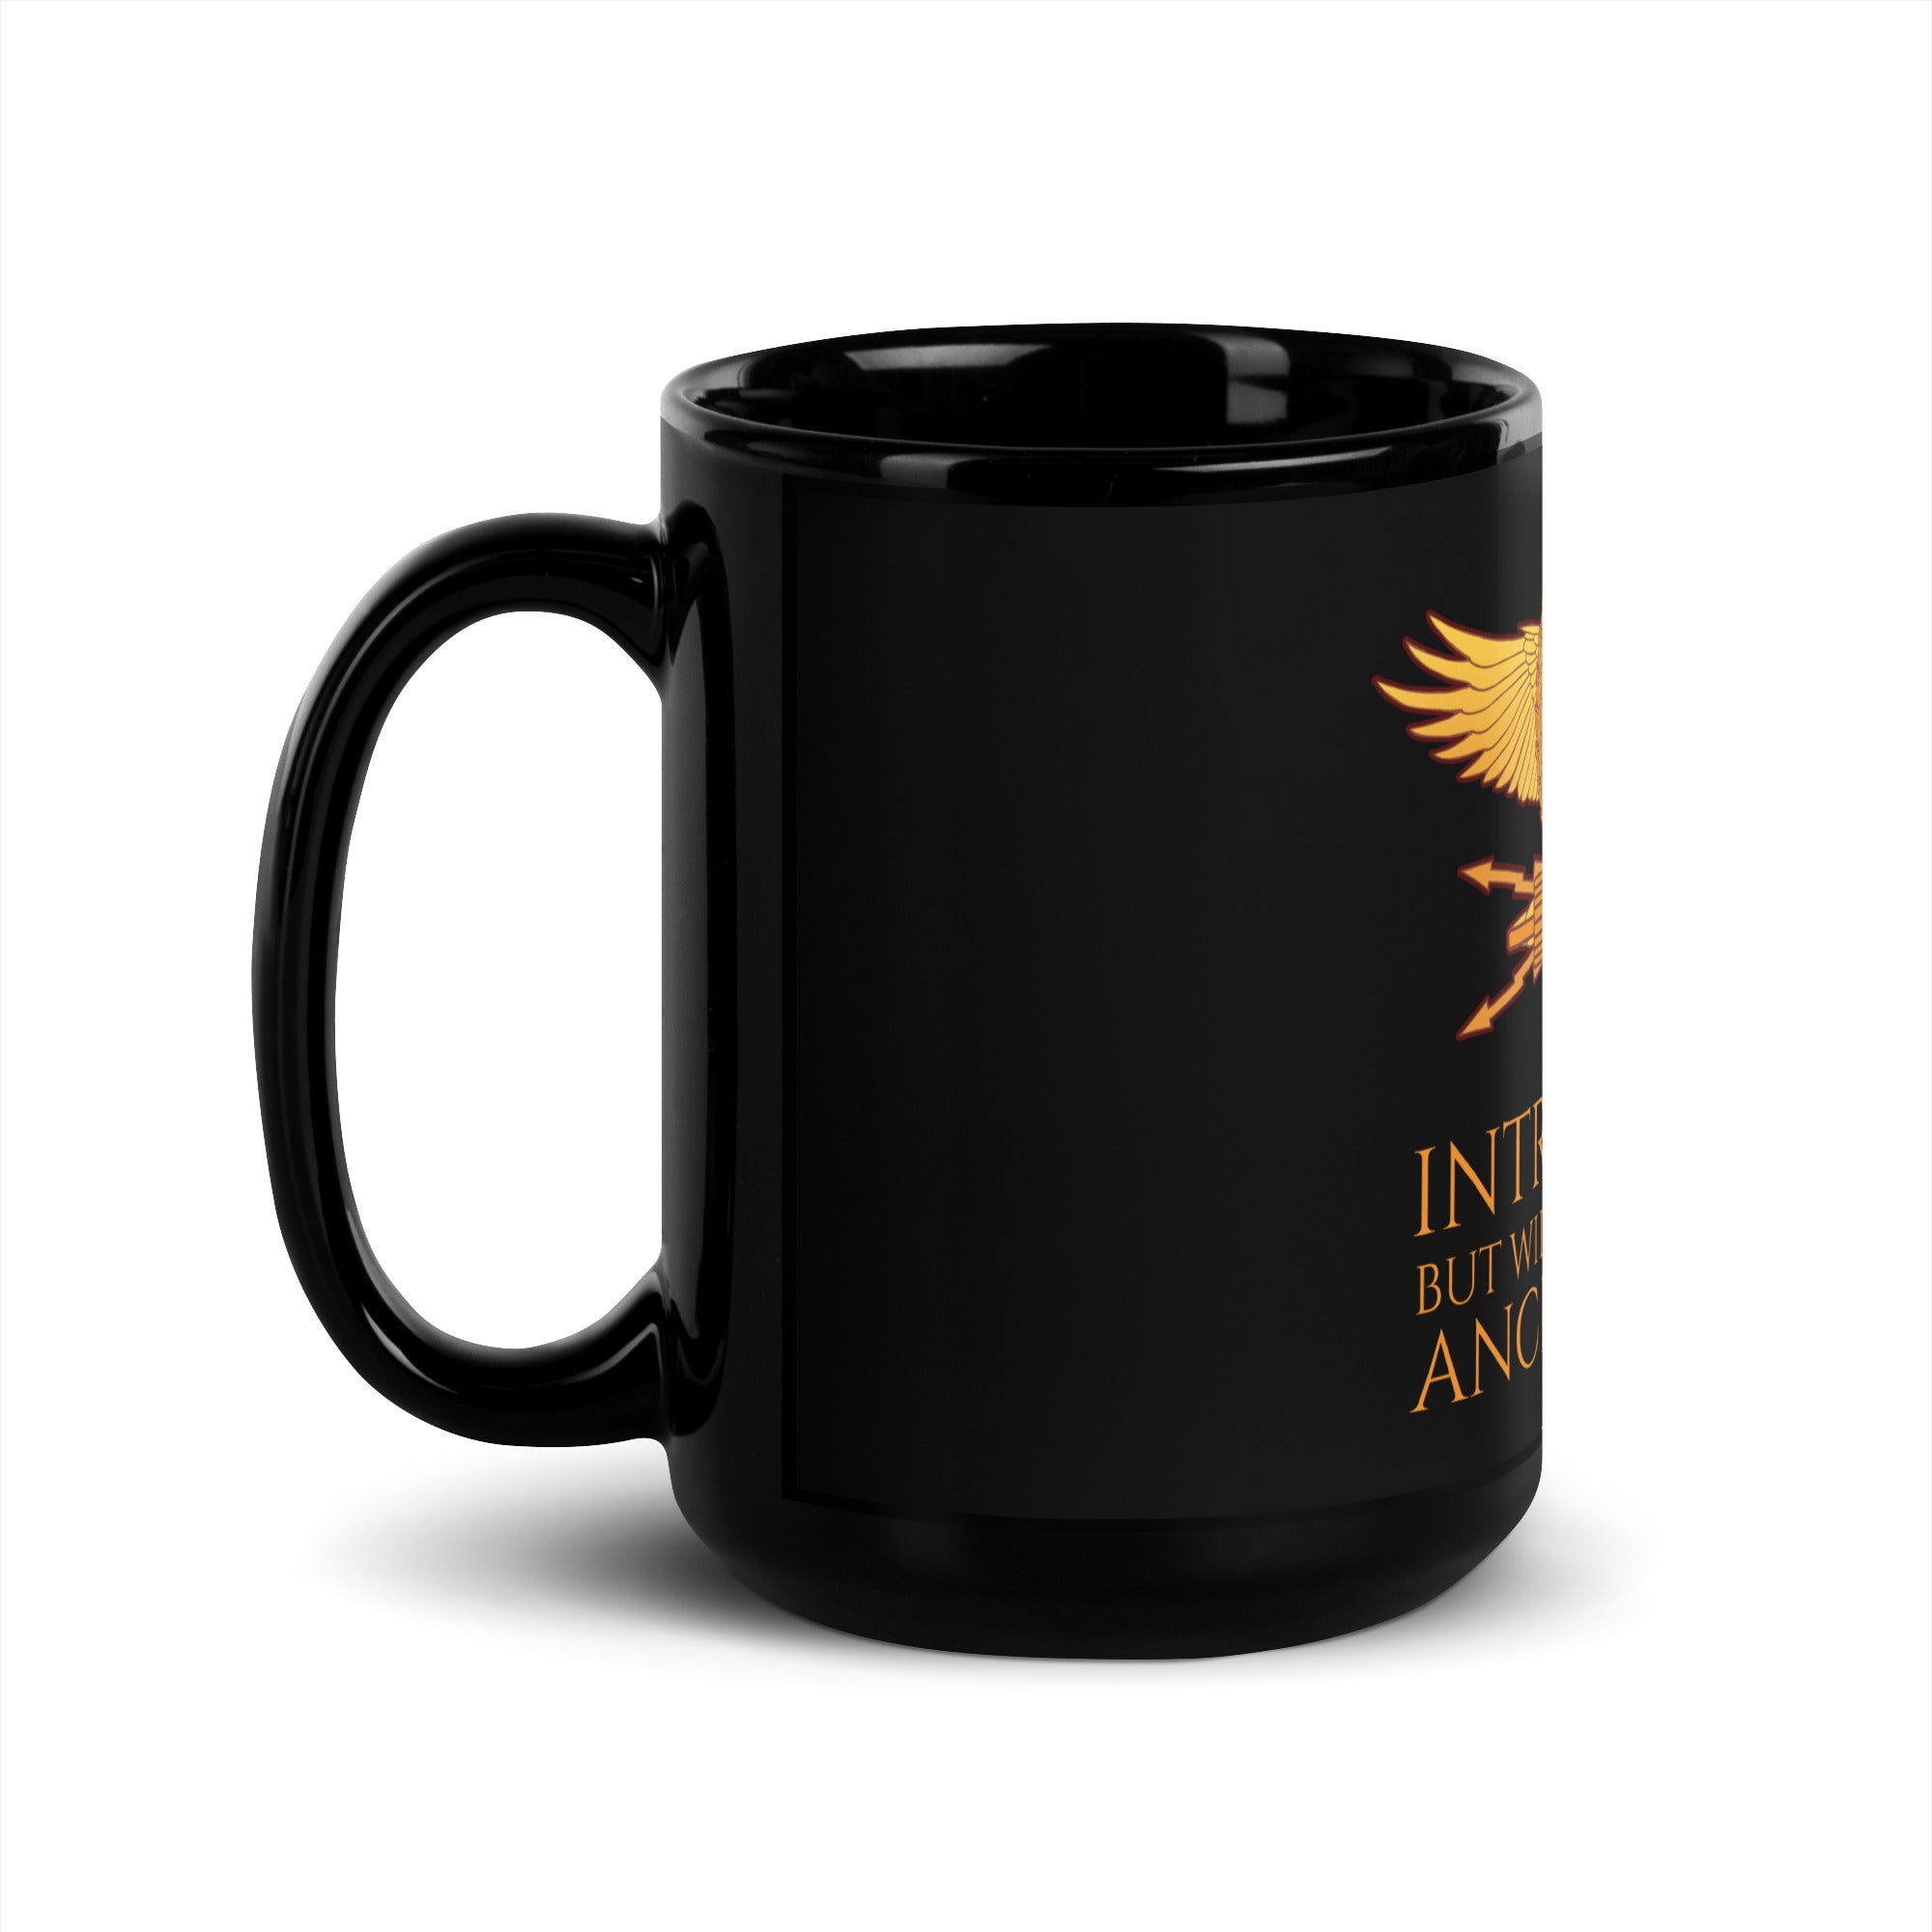 Introverted, But Willing To Discuss Ancient Rome - Roman History Black Glossy Mug